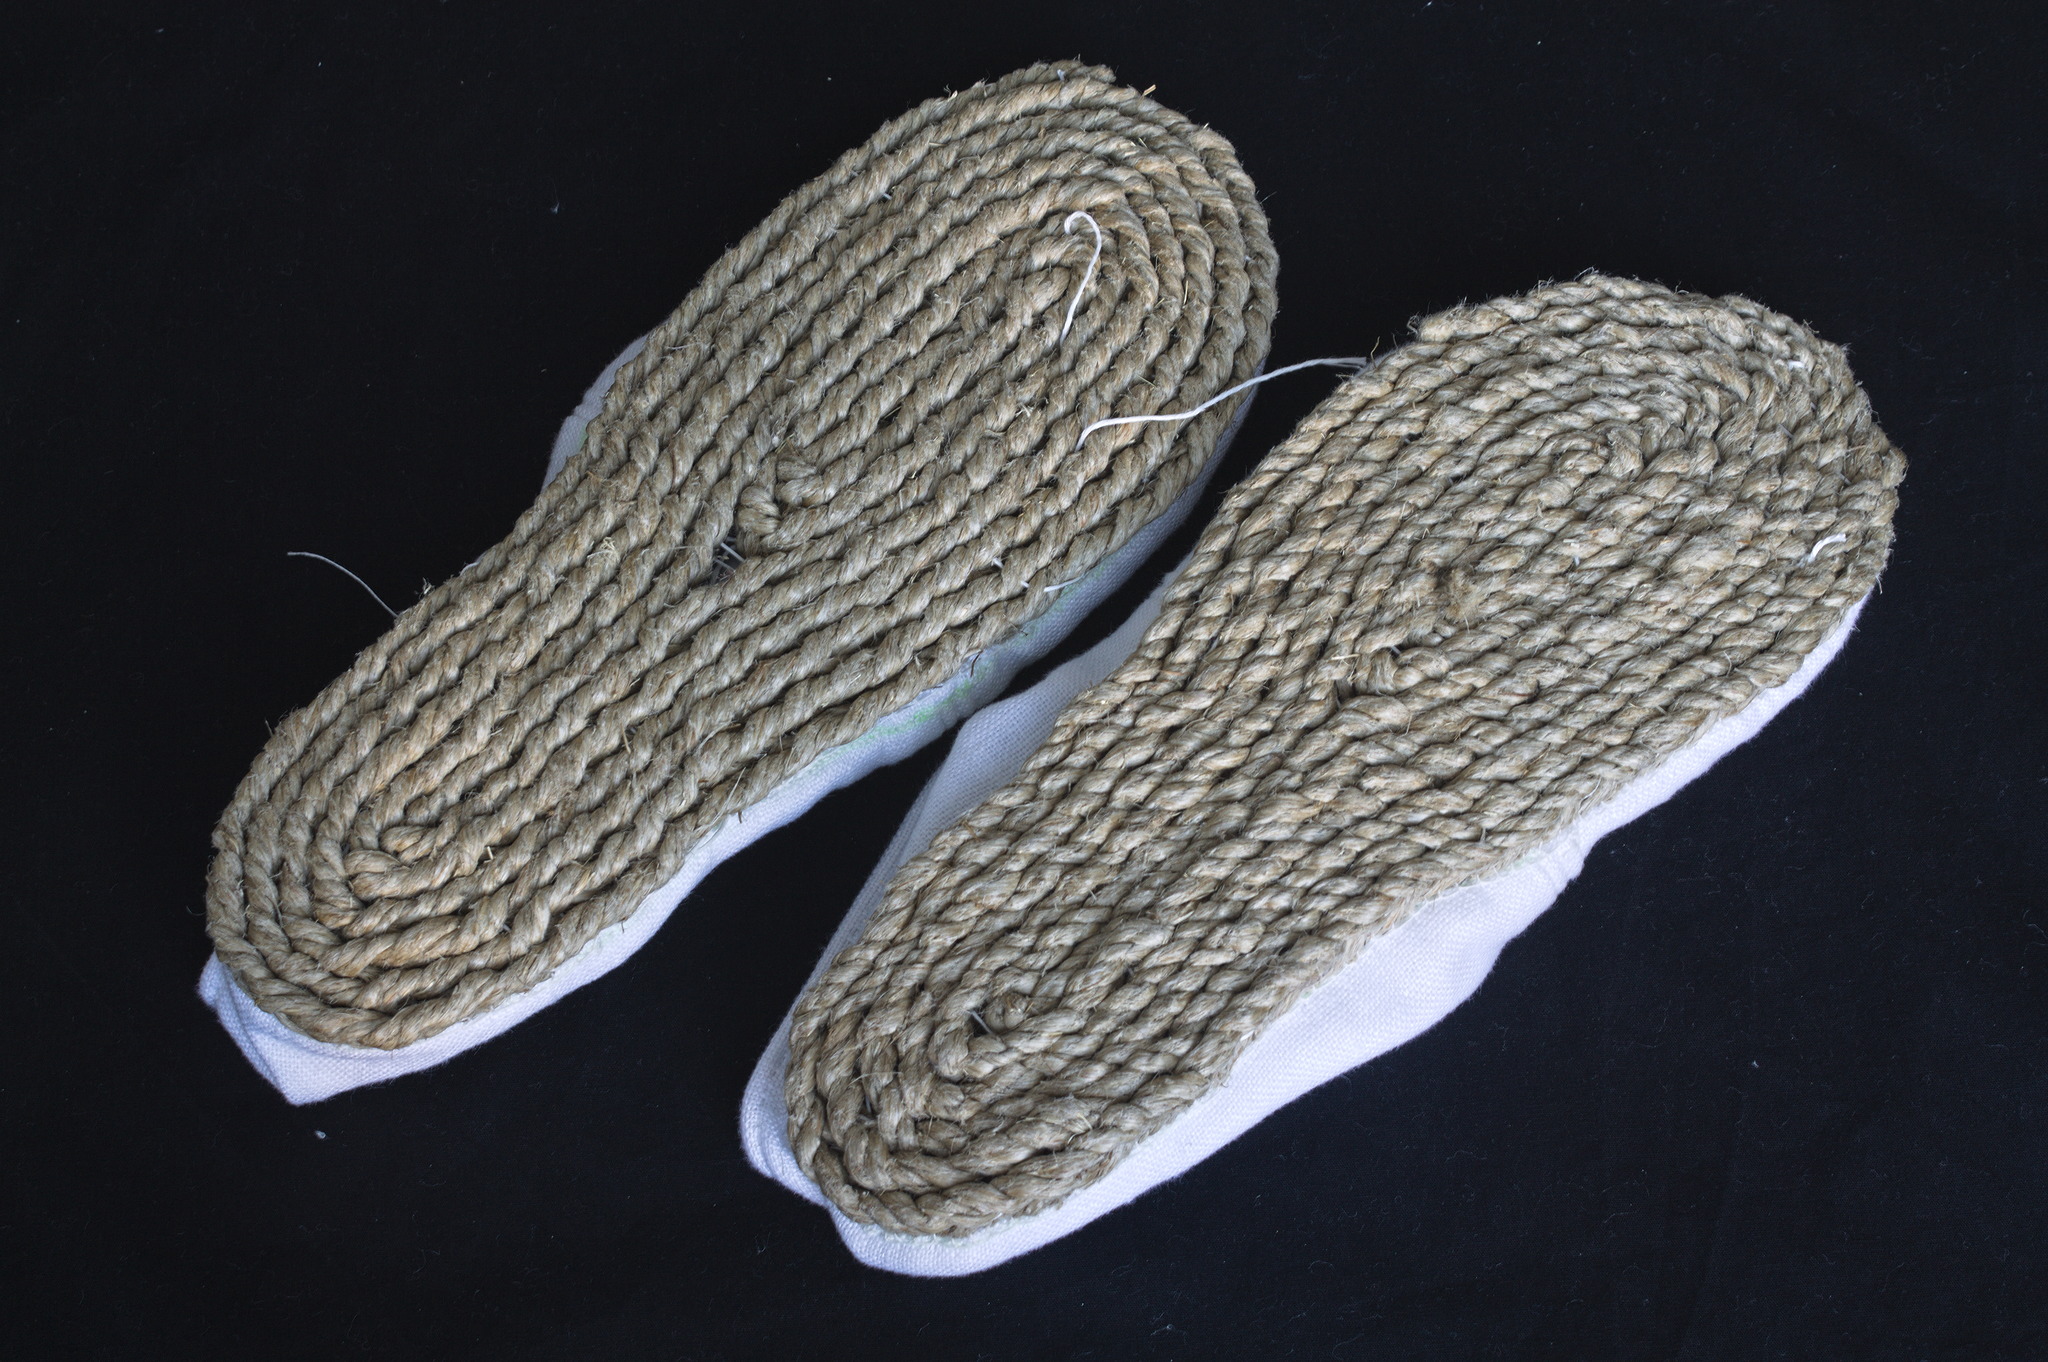 the slippers with the braided soles on top.